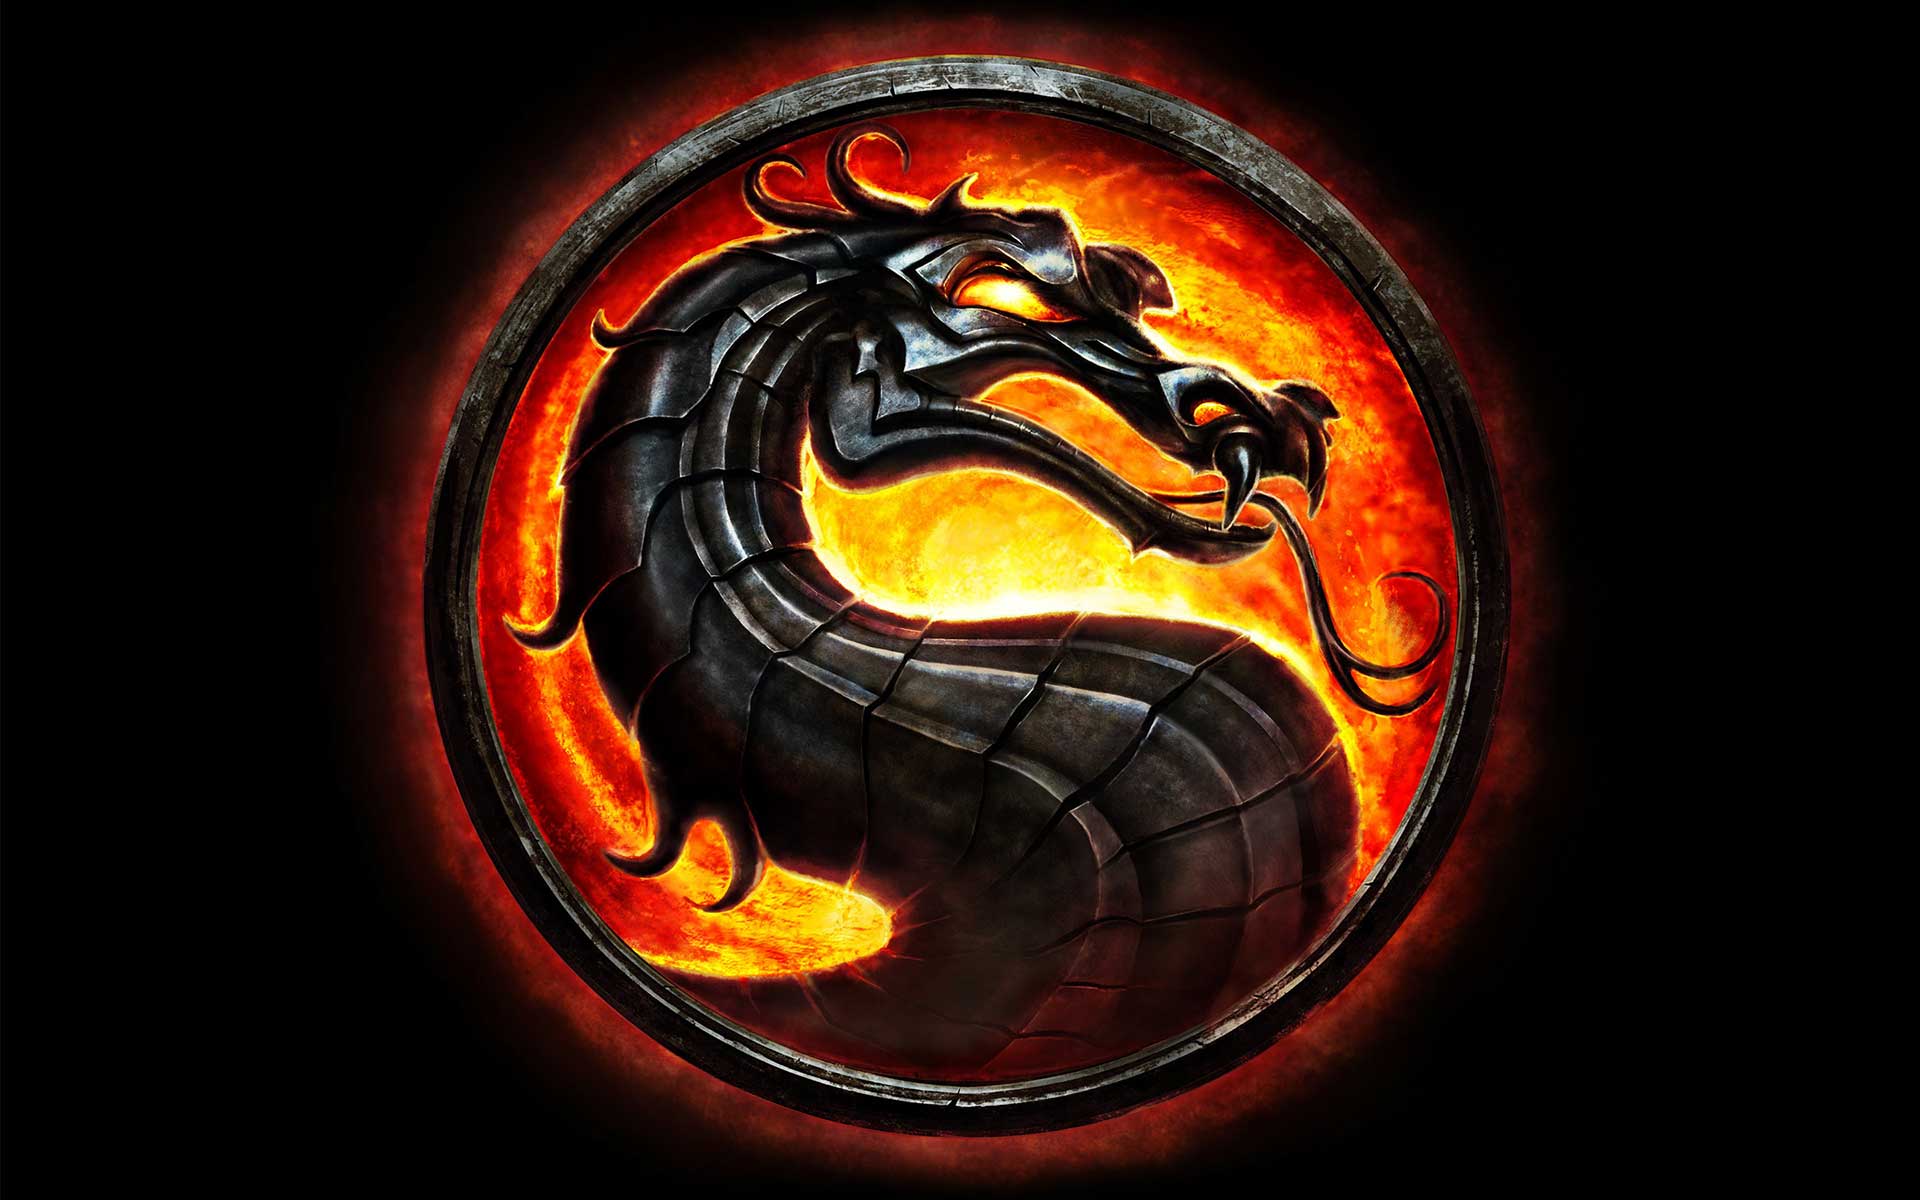 Mortal Kombat could be the name of the next